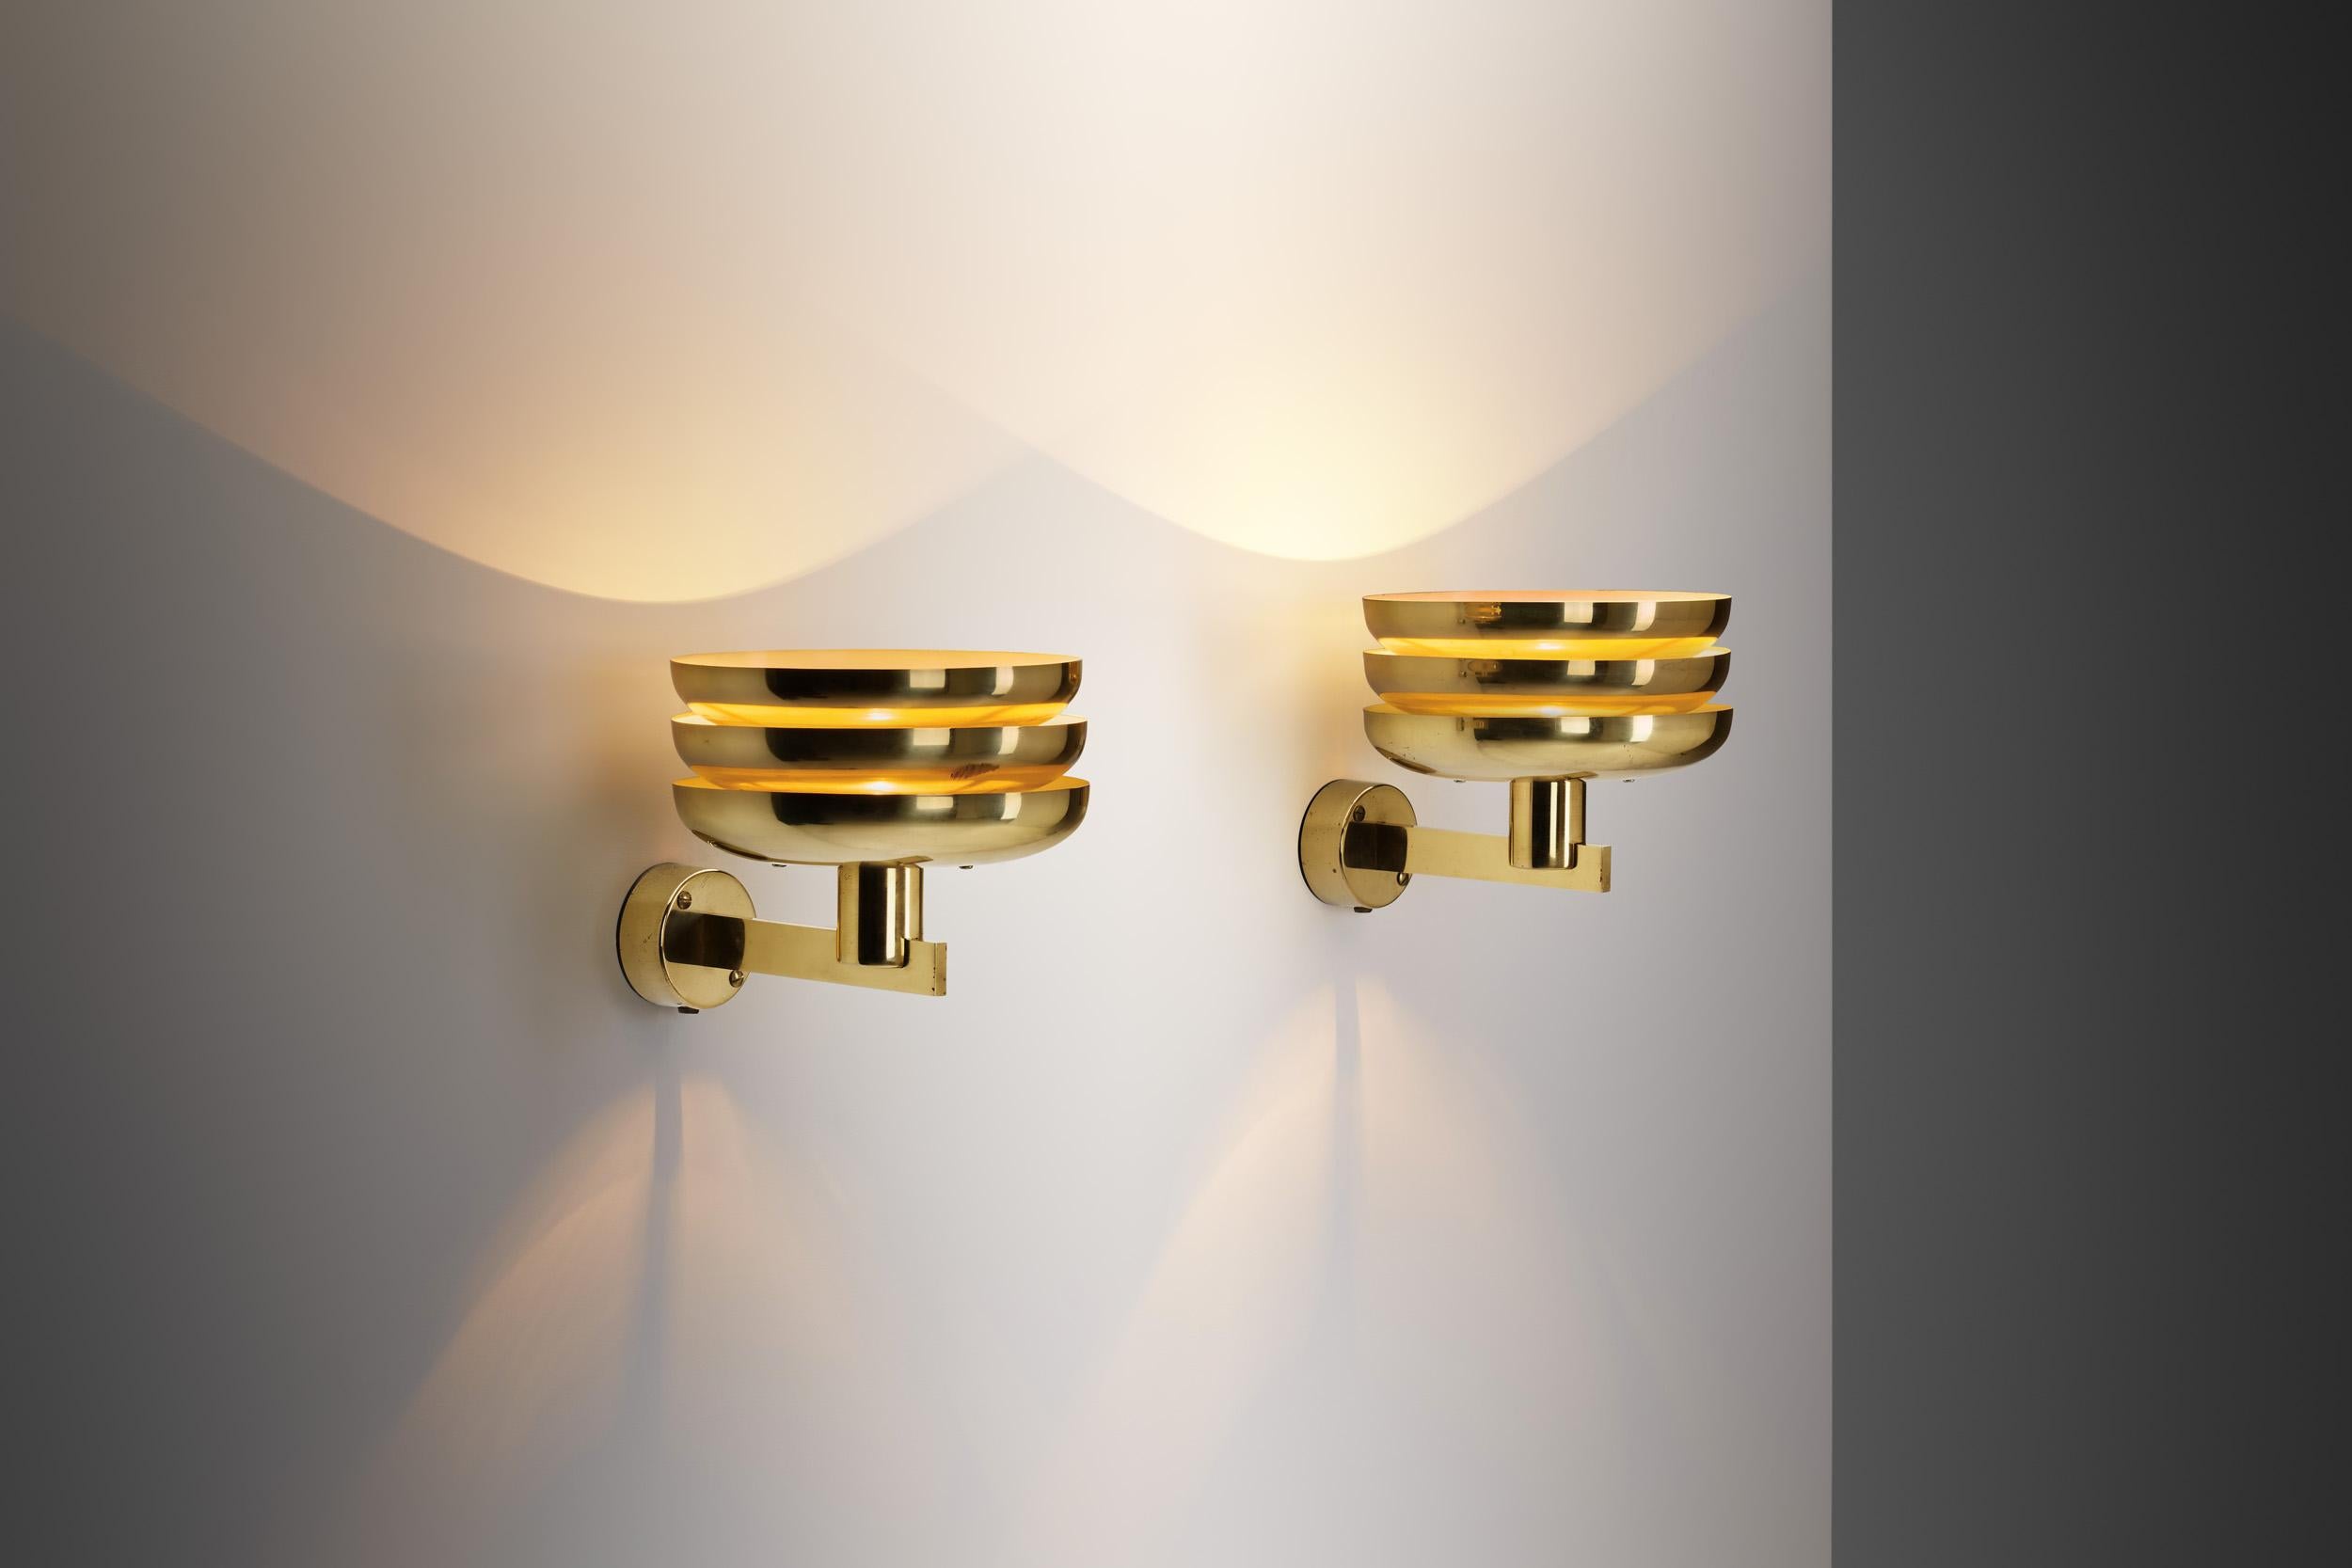 Hans-Agne Jakobsson's present “V361” wall light stands as exemplary pieces to the ingenuity of mid-century Swedish lighting design. Crafted in the 1950s for AB Markaryd, the luminaire encapsulates Jakobsson's profound influence on the mid-century